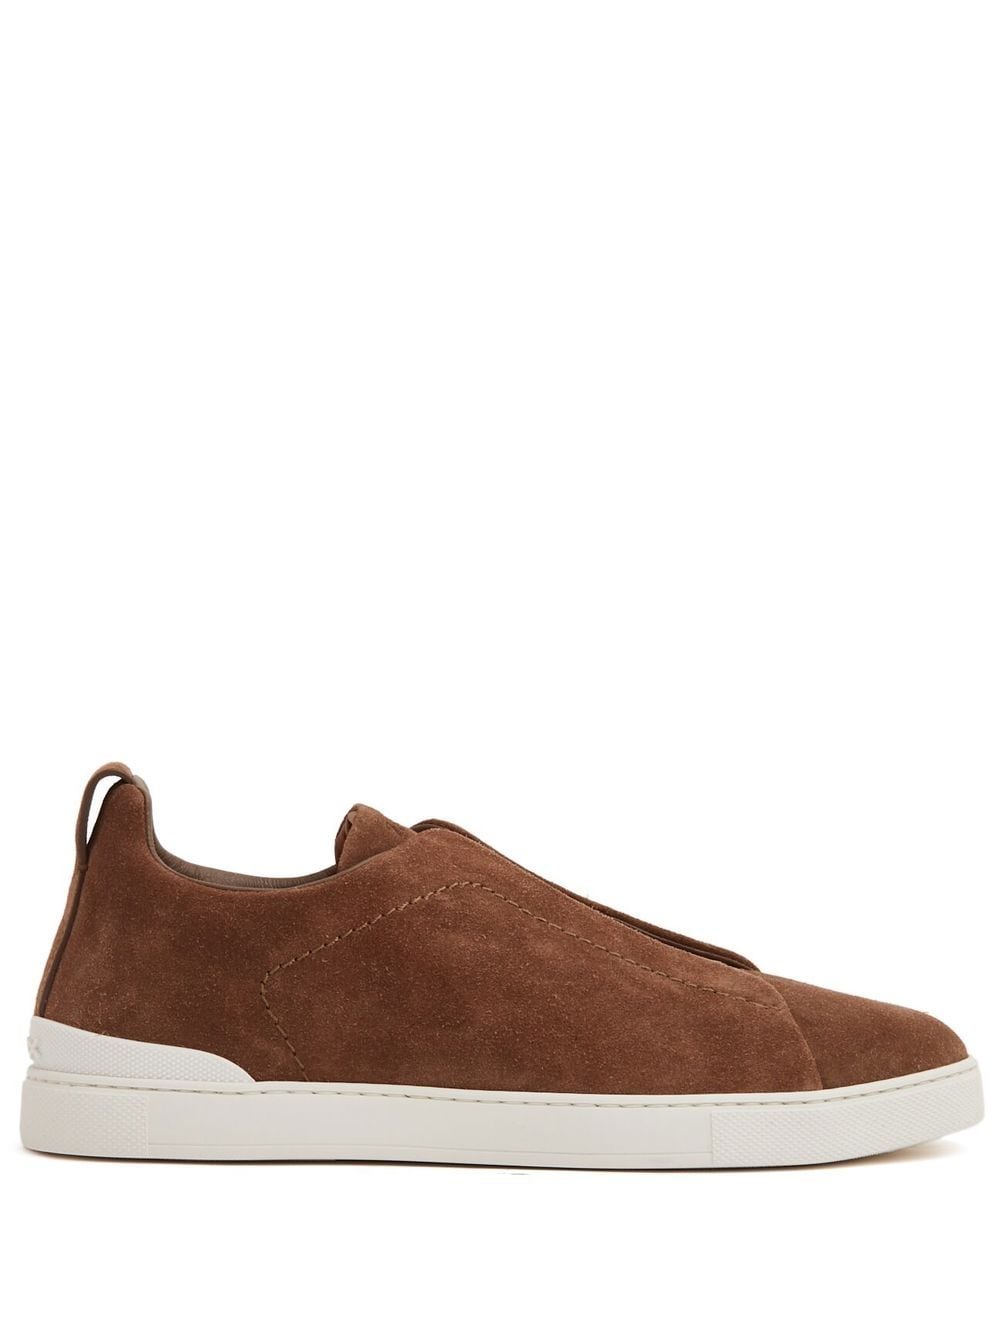 Zegna Suede low-top Sneakers - Farfetch